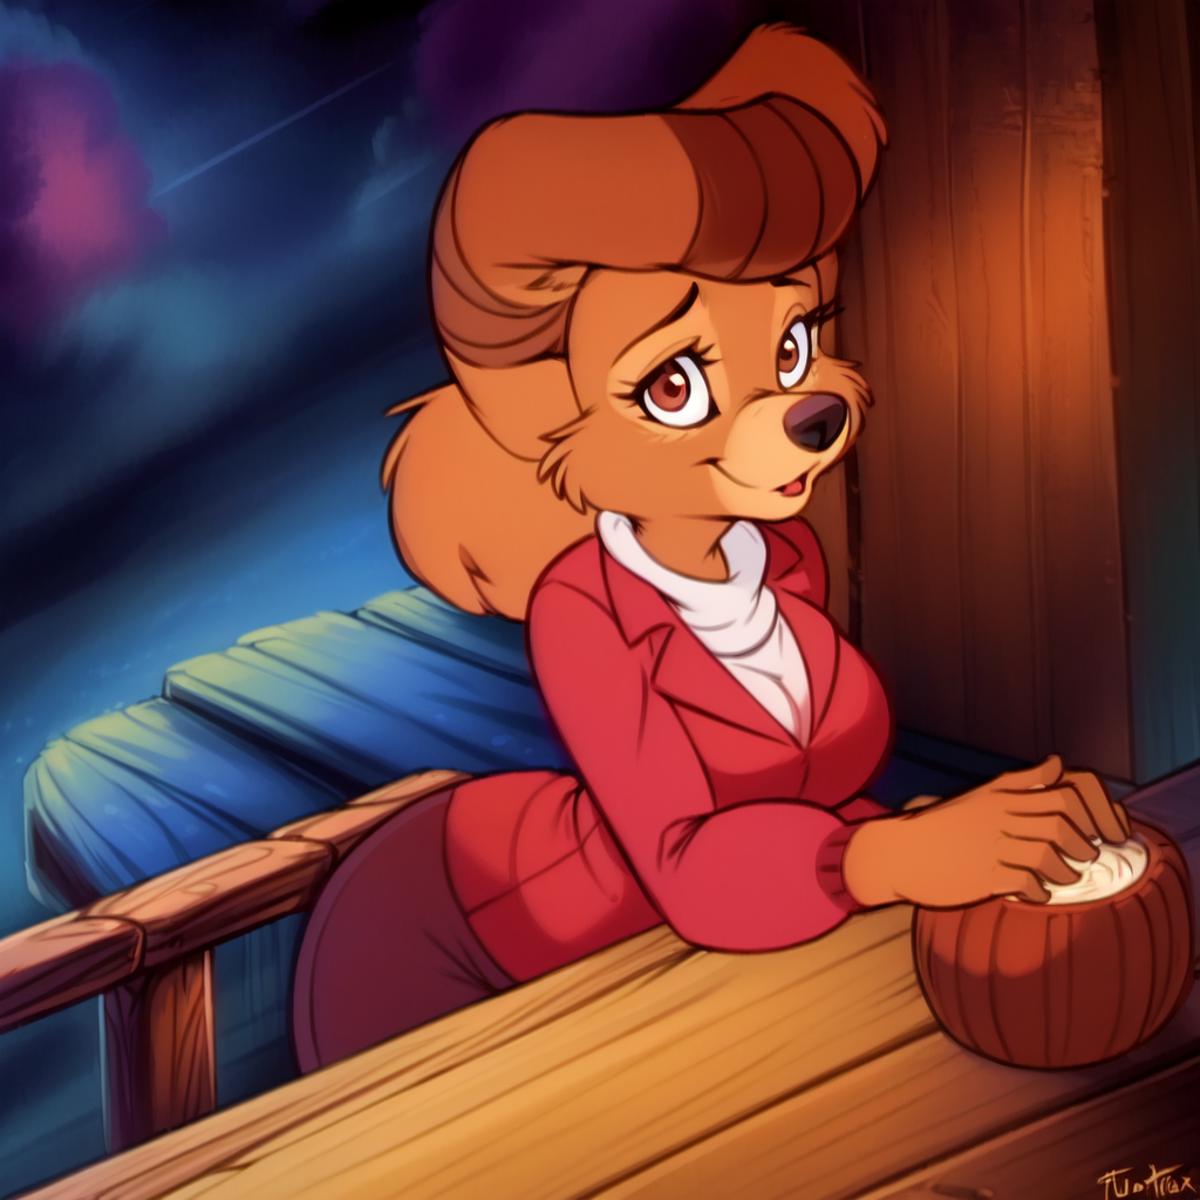 TaleSpin - Rebecca Cunningham (Experimental) image by Aigenerater